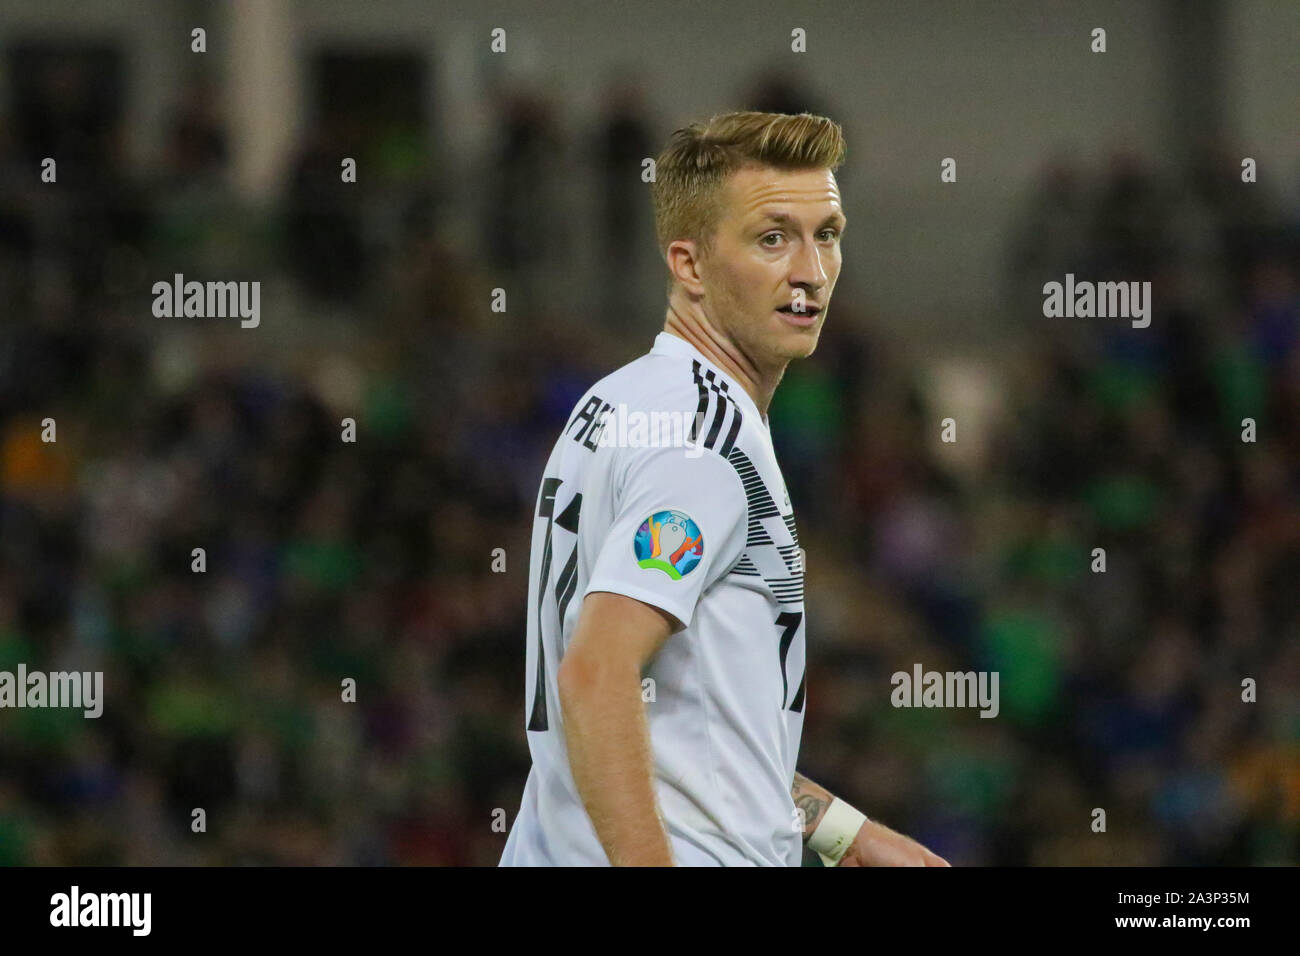 National Football Stadium at Windsor Park, Belfast, Northern Ireland. 09th Sept 2019. UEFA EURO 2020 Qualifier- Group C, Northern Ireland 0 Germany 2. German football international Marco Reus (11) playing for Germany in Belfast 2019. Stock Photo